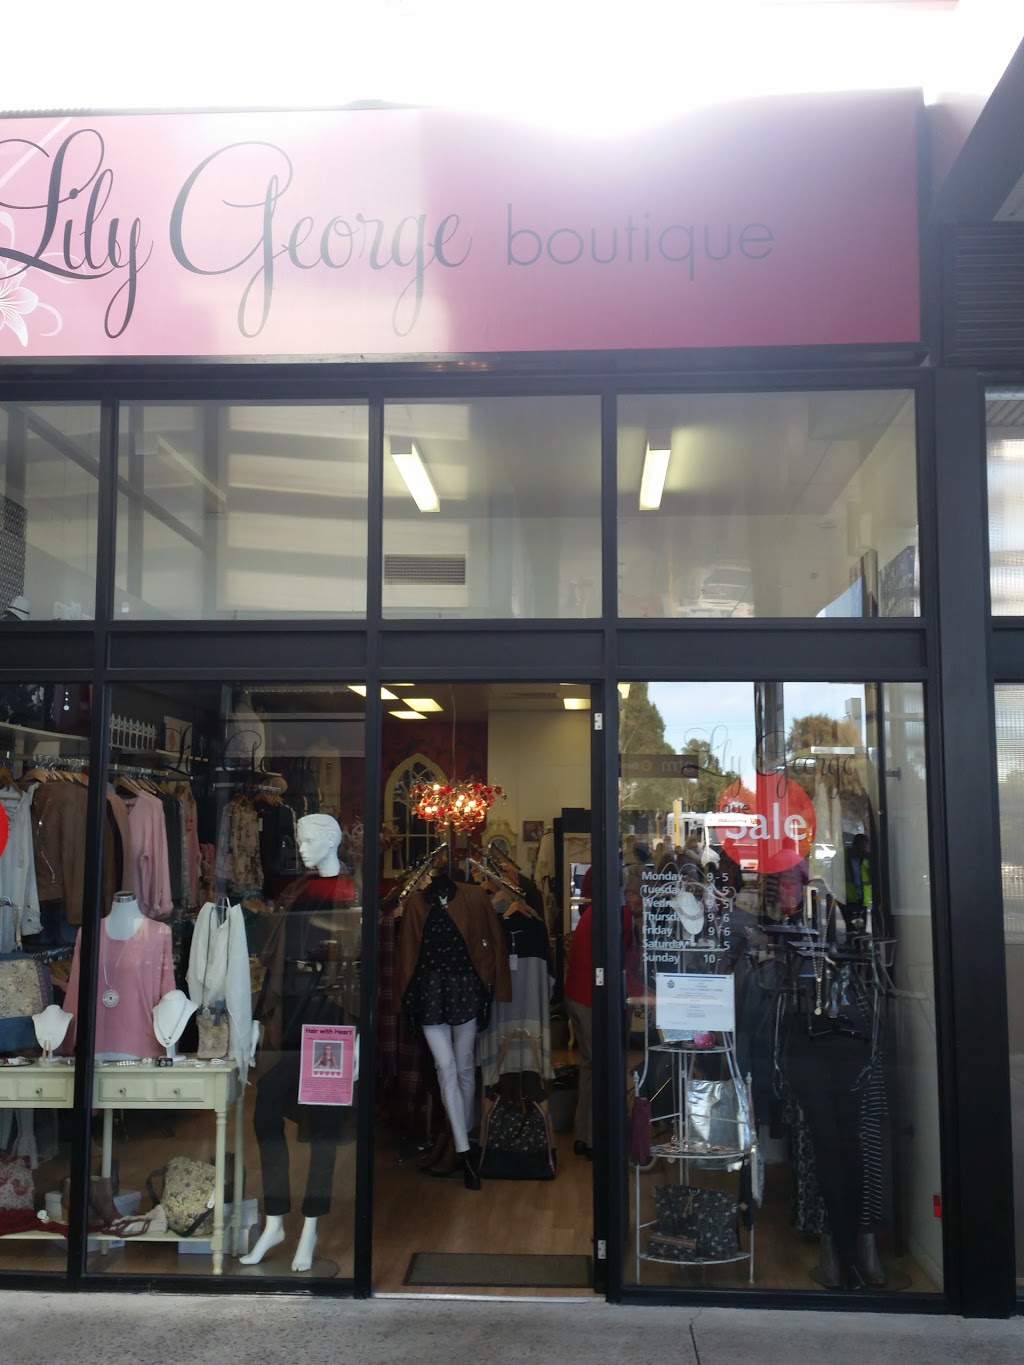 LILY BOUTIQUE Clothing store Leopold VIC 3224, Australia